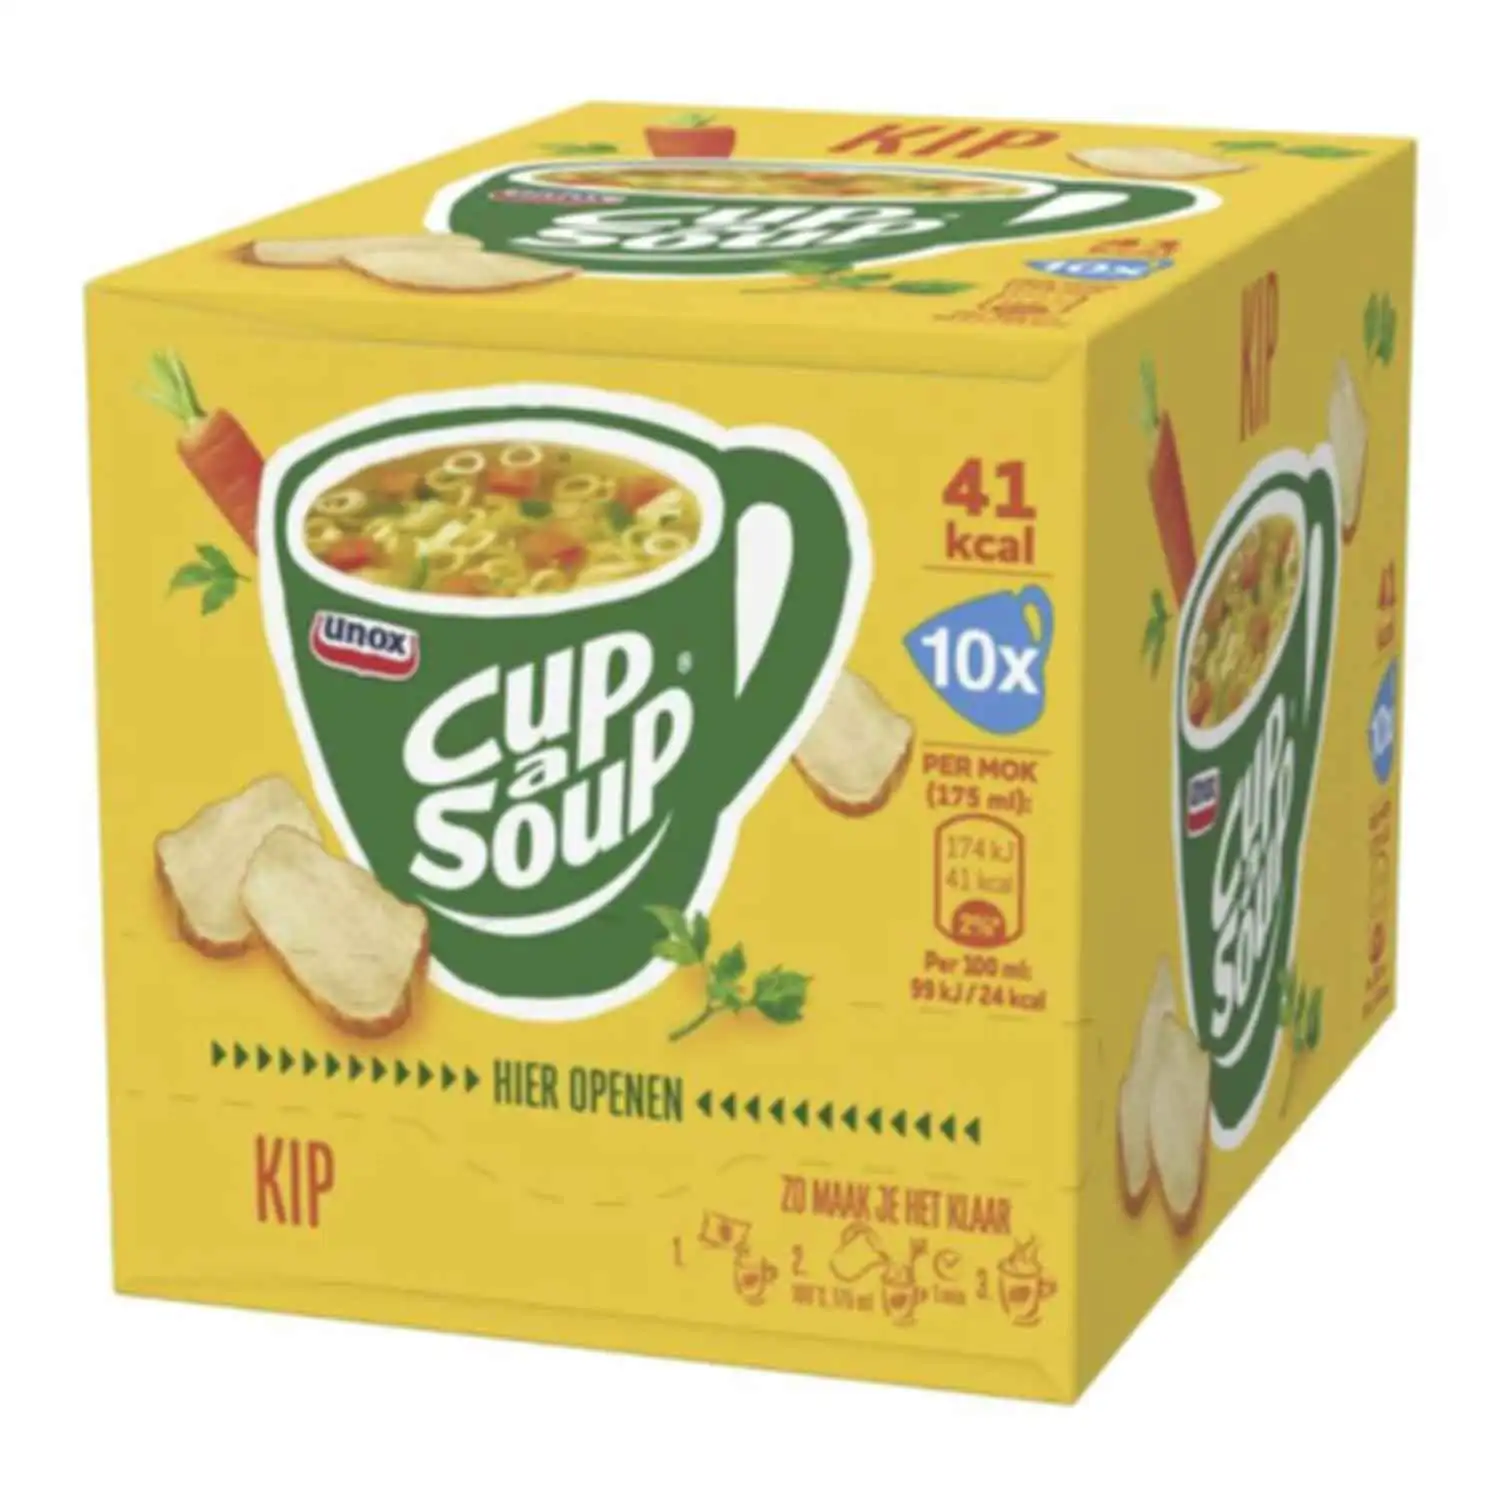 10x Cup a Soup chicken 12g